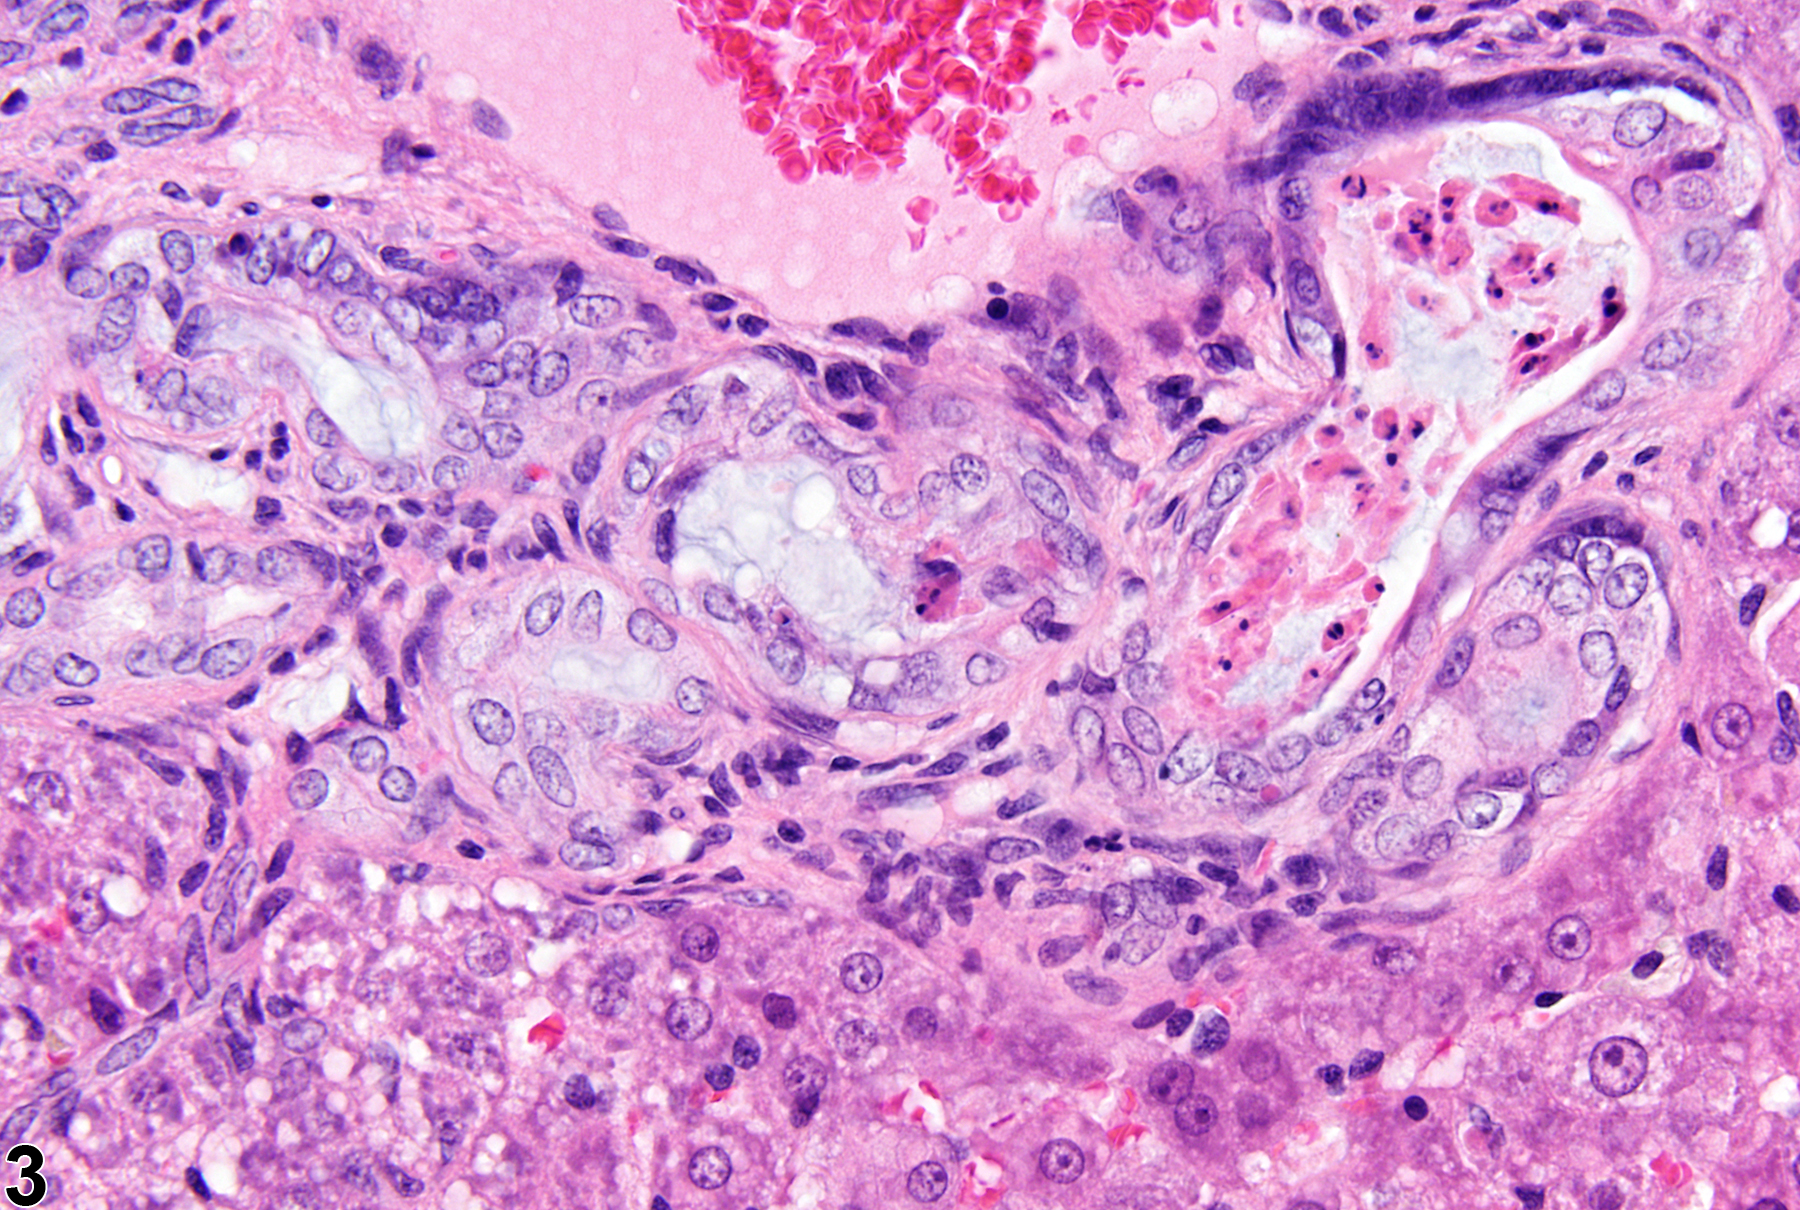 Image of cholangiofibrosis in the liver from a male  F344/N rat in a subchronic study